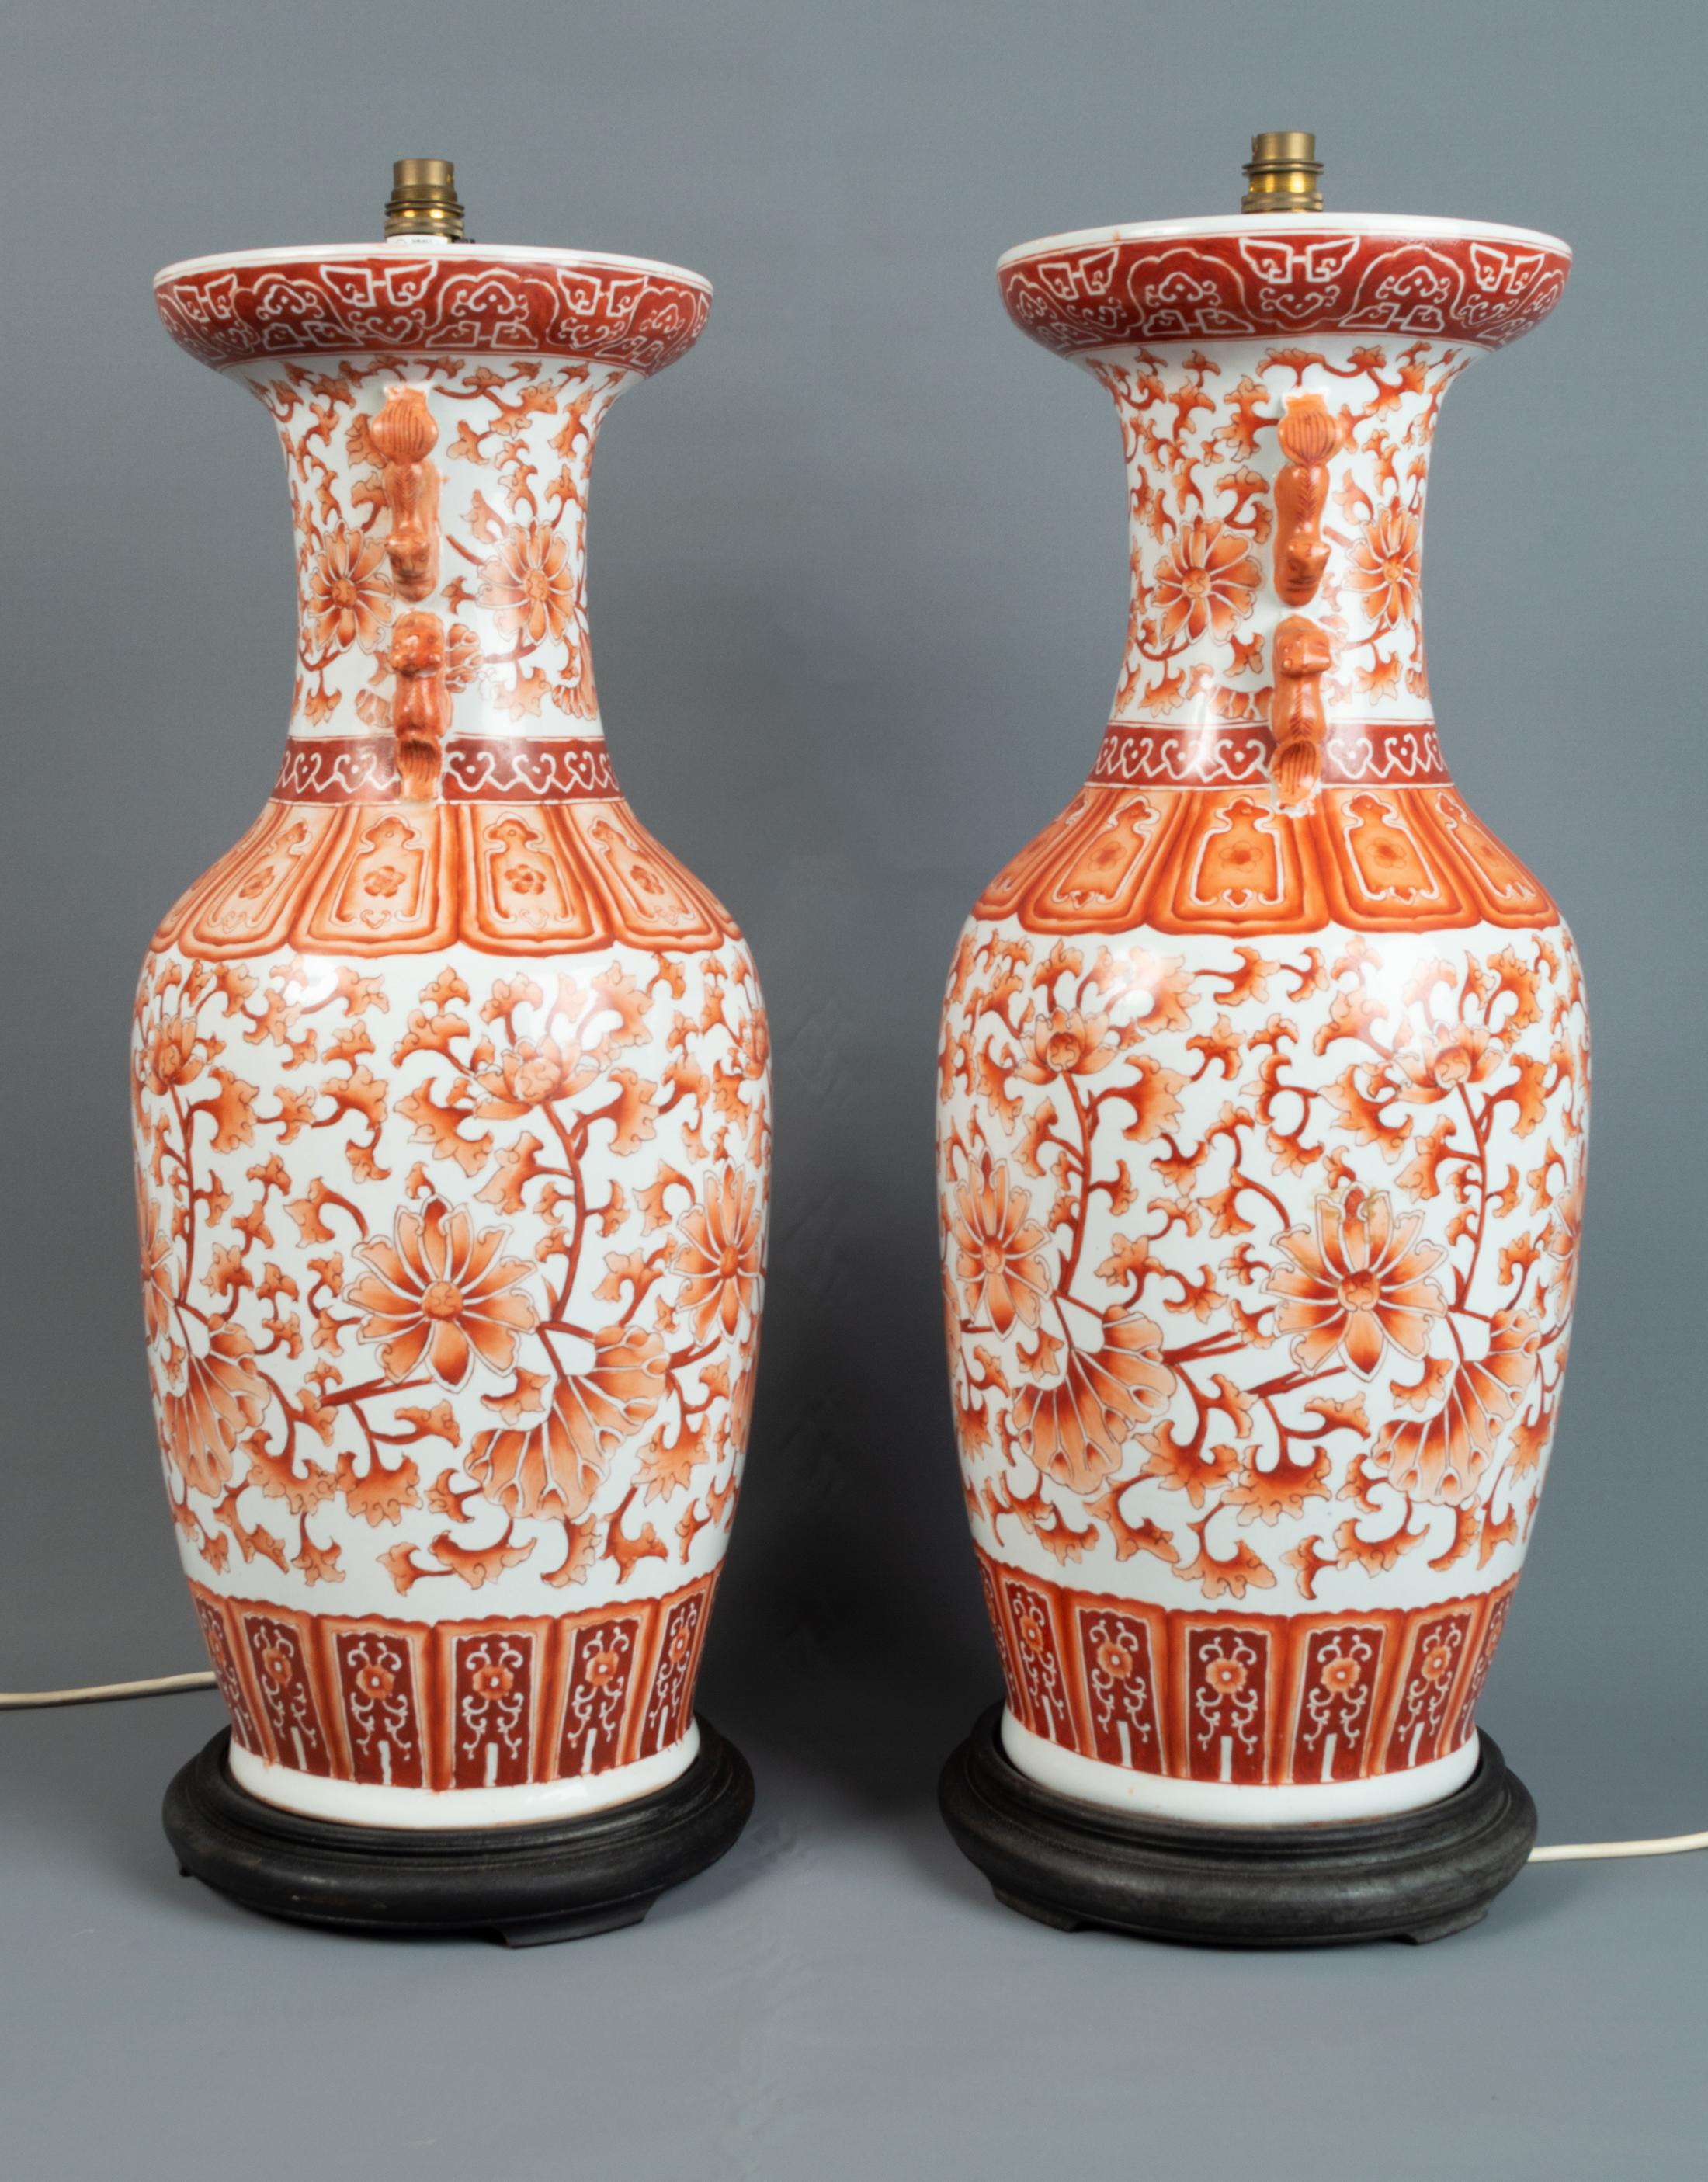 A pair of large 19th century Chinese porcelain lamp vases. 
China, C.1850

The white ground porcelain decorated in orange and rust foliate and flower motifs with foo dog applied handles. Mounted on wooden bases.

Free from chips, cracks or